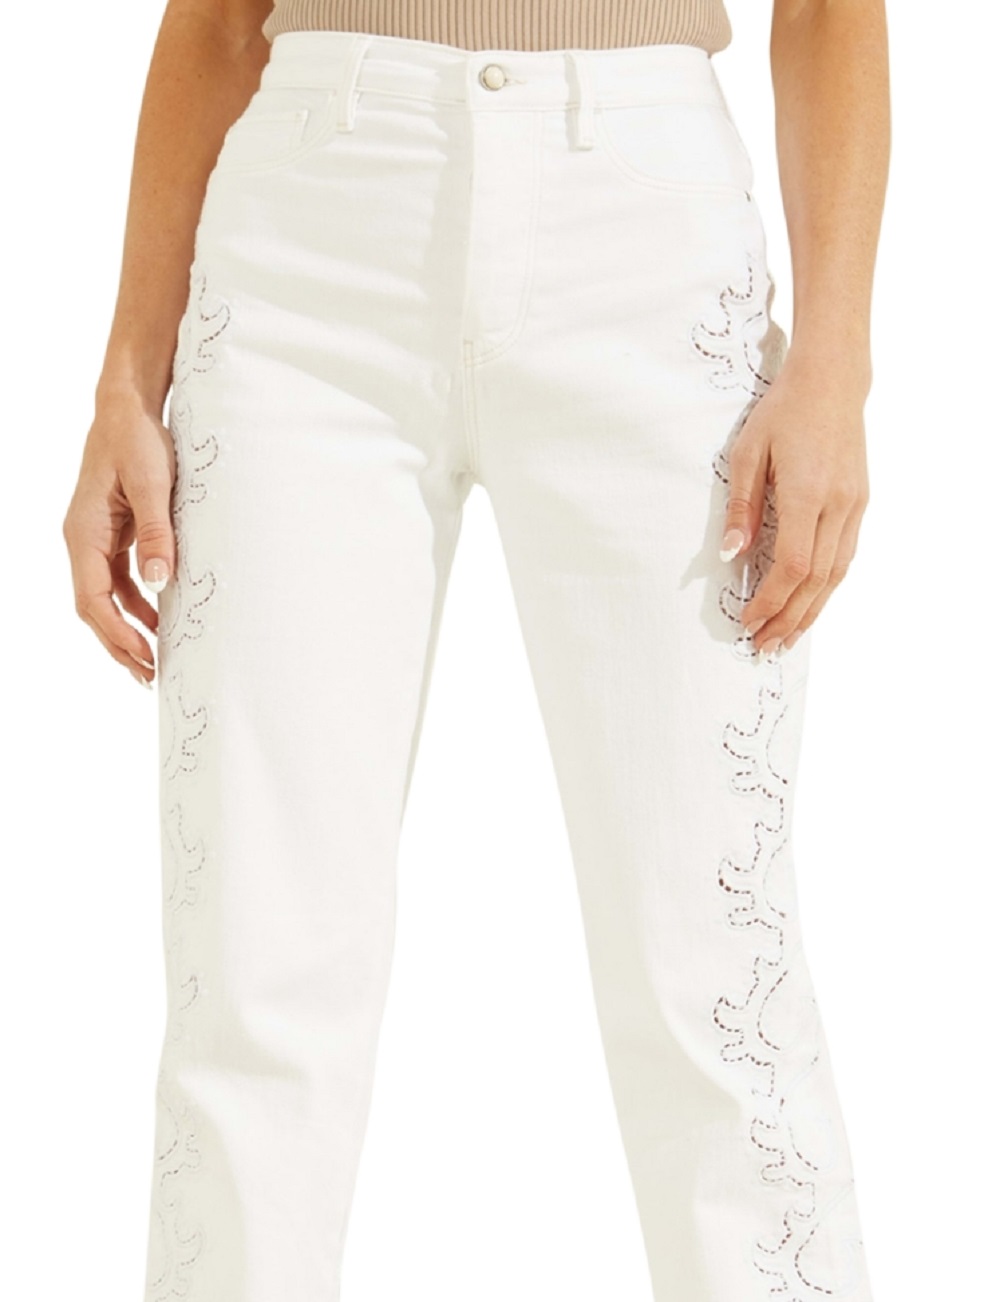 GUESS Women's Embroidered Straight Leg Jeans White Size 31X33